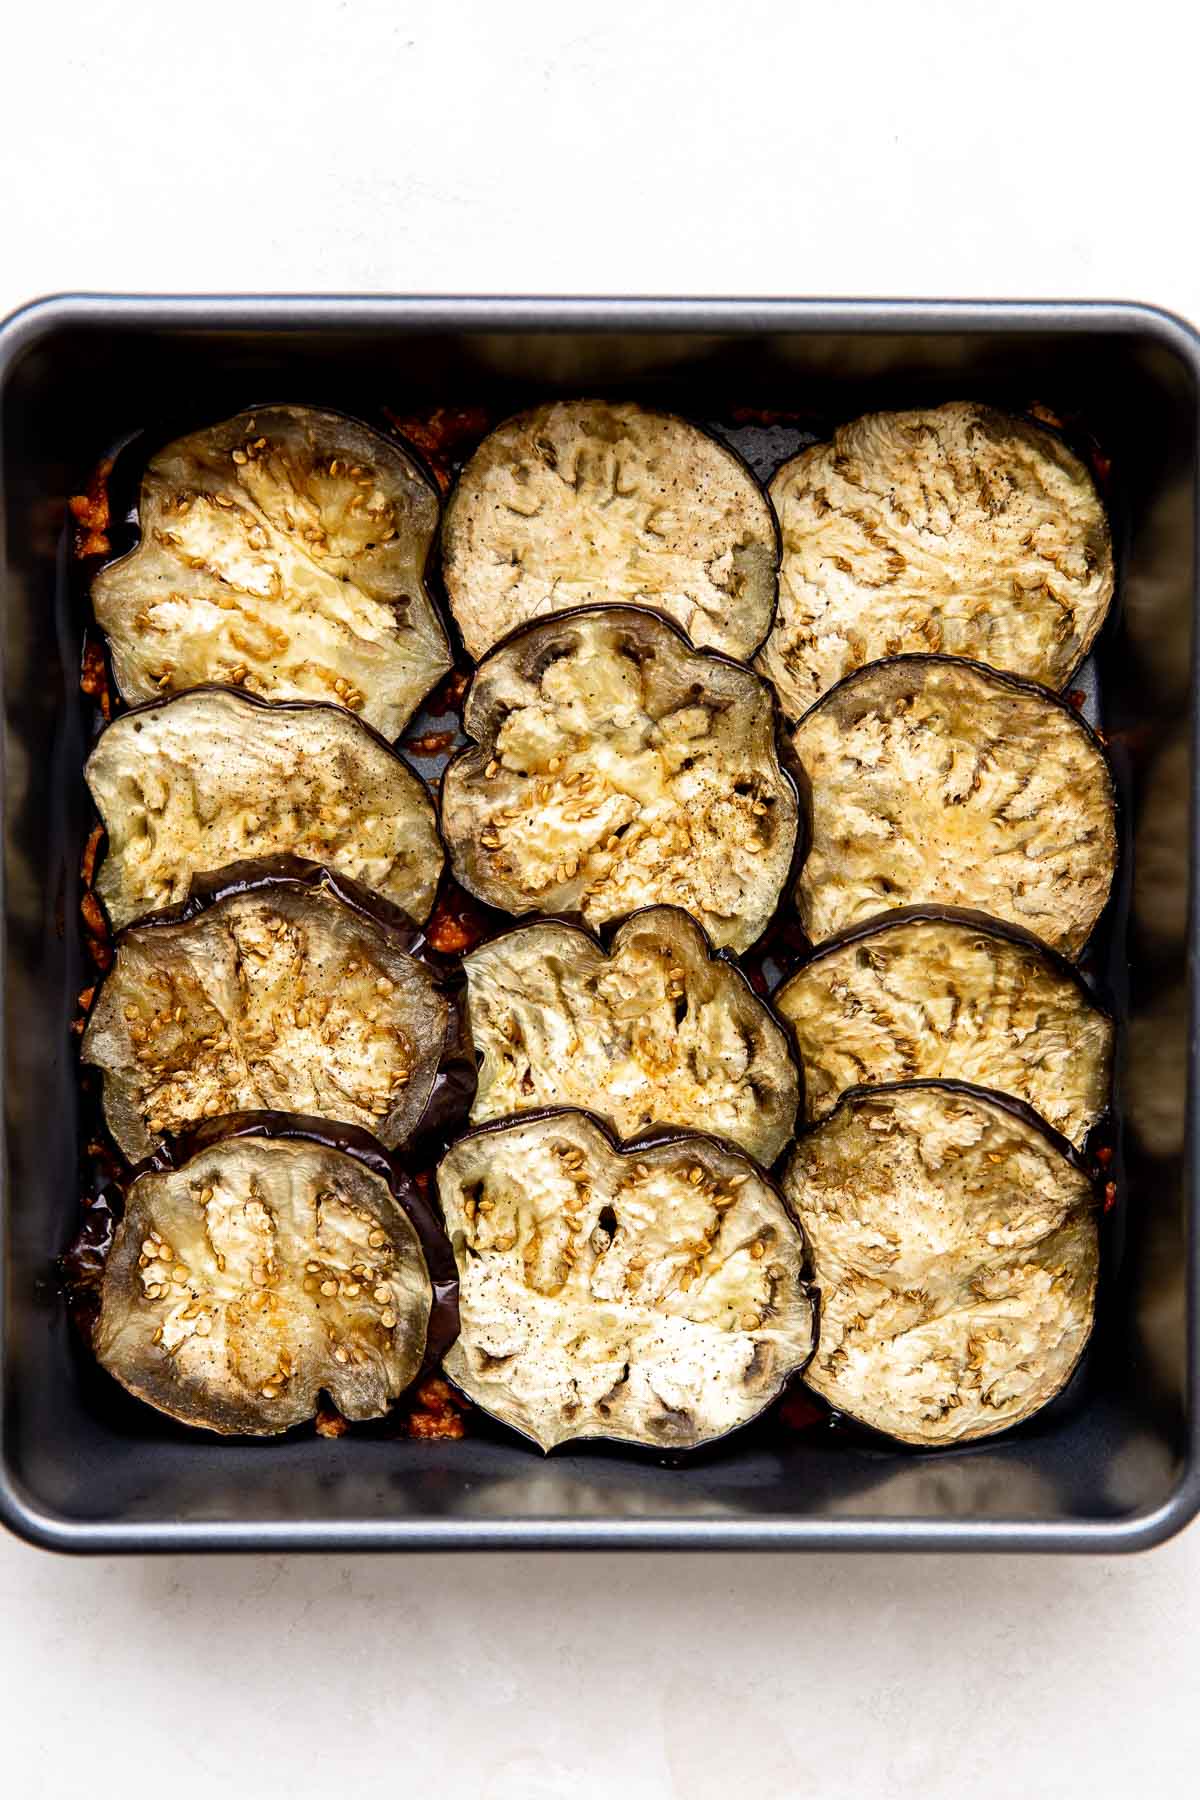 A layer of turkey bolognese topped with a layer of roasted eggplant rounds fills a 9x9 metal baking dish that sits atop a creamy white textured surface.